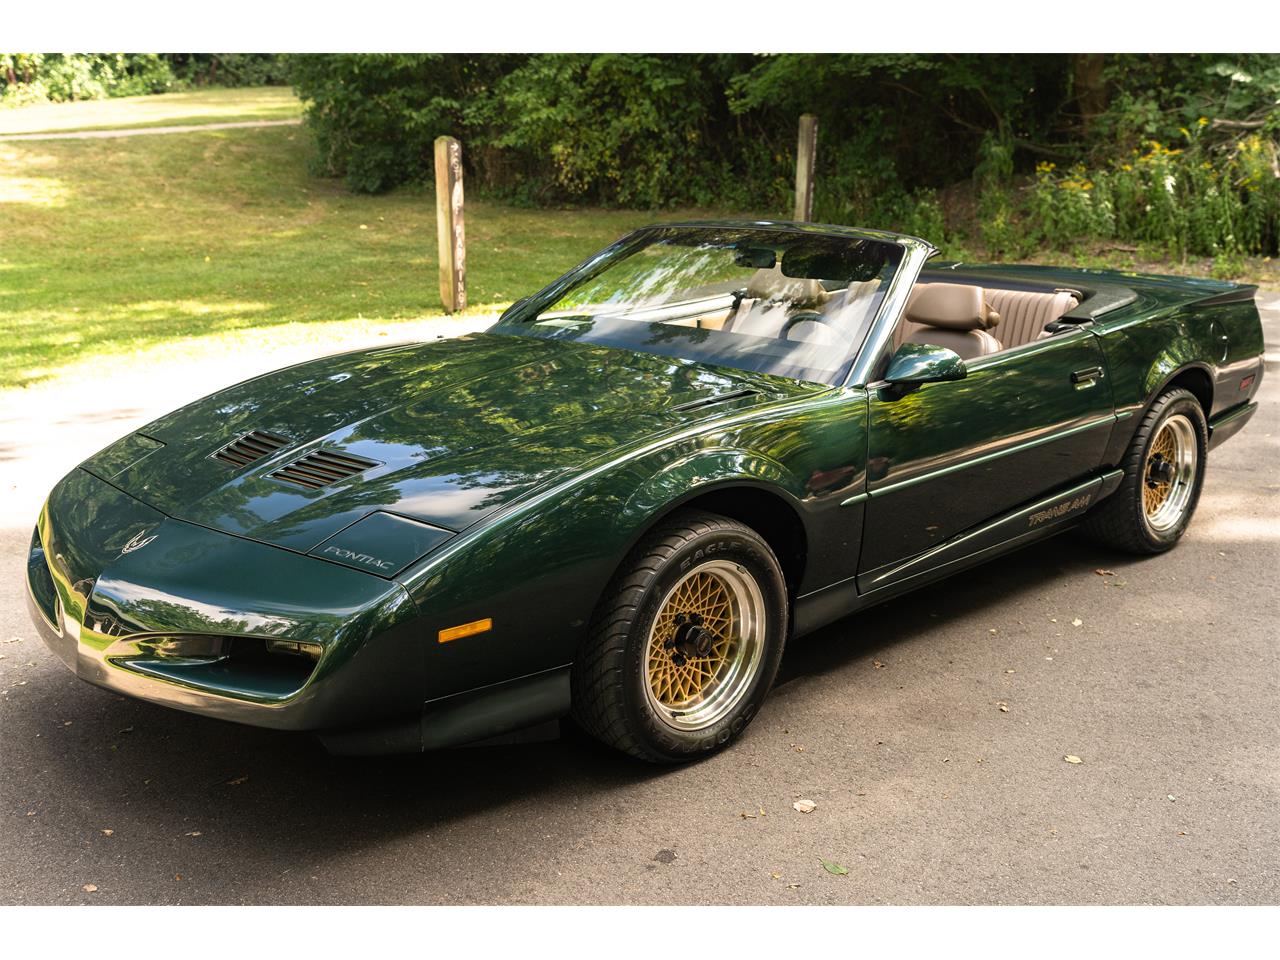 For Sale: 1992 Pontiac Firebird Trans Am in Elkhart, Indiana for sale in Elkhart, IN